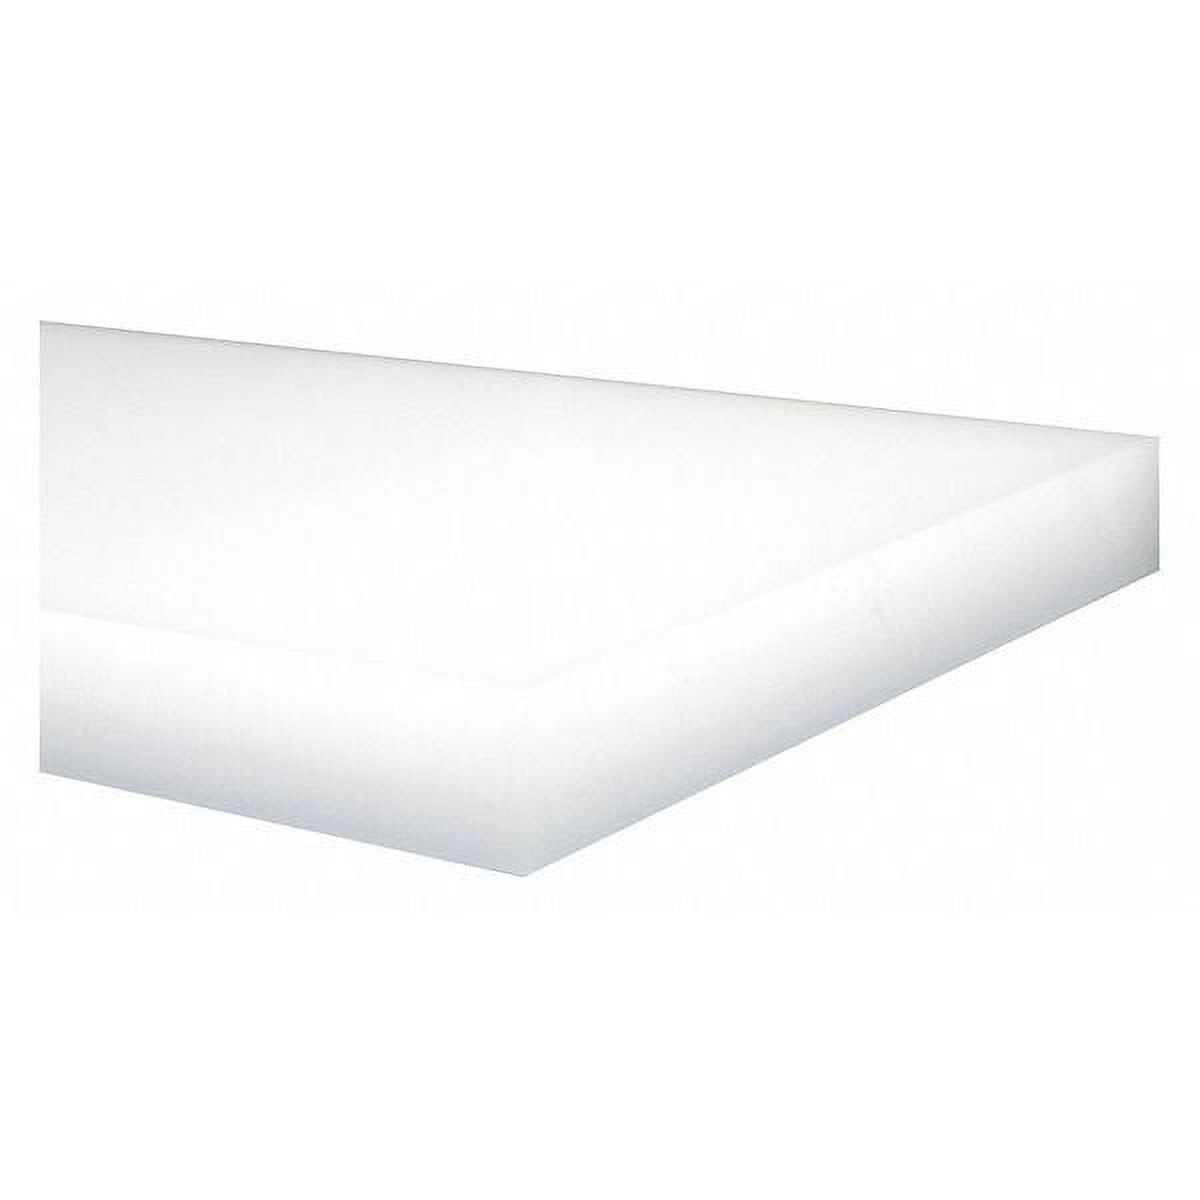 SHAPE PRODUCTS 24 in. x 36 in. x .100 in. White HDPE Sheet (2-Pack